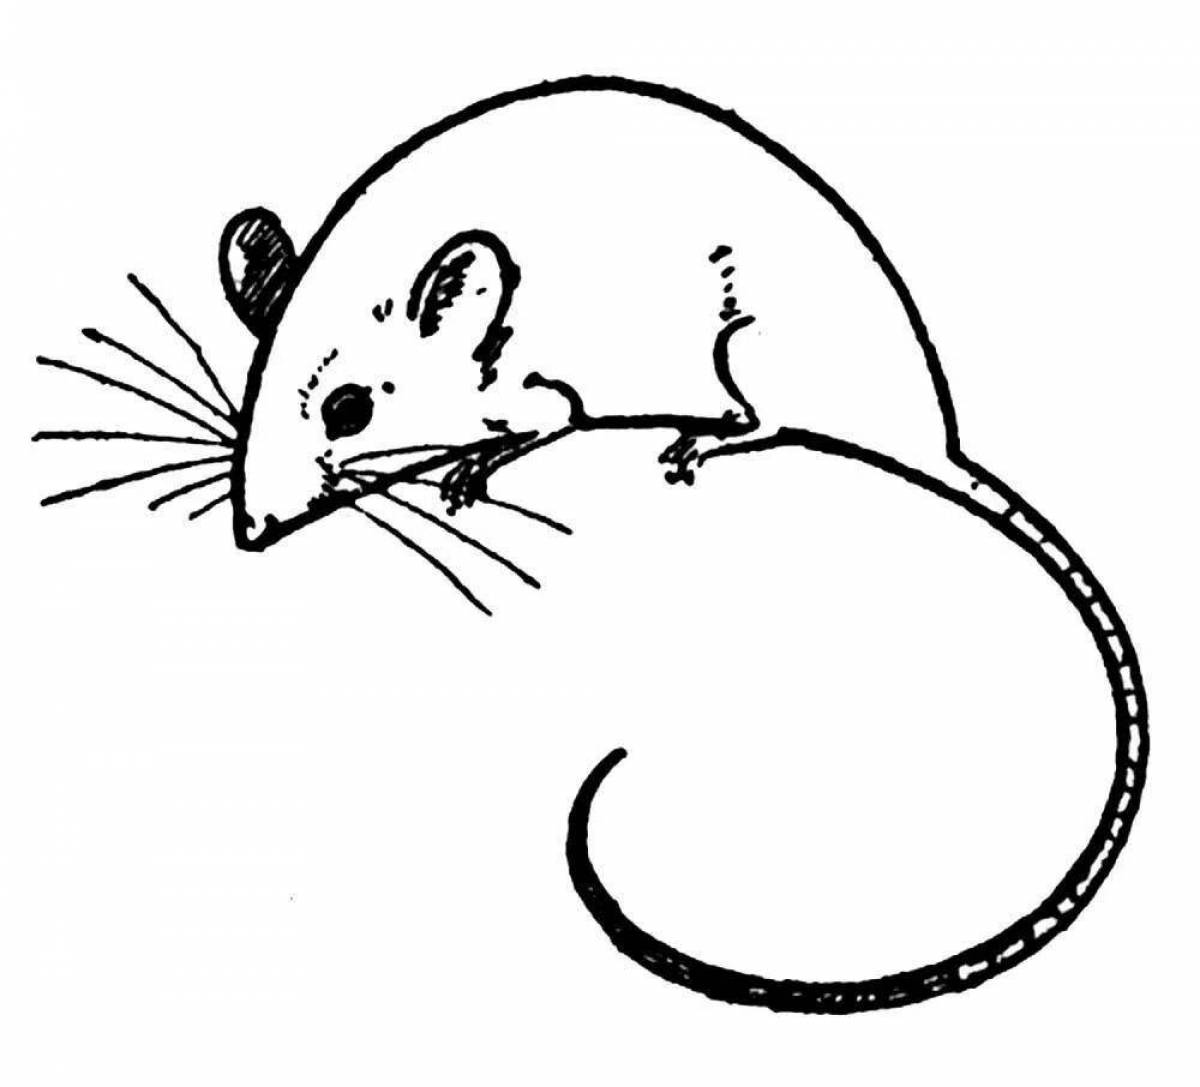 Coloring book brave rodent